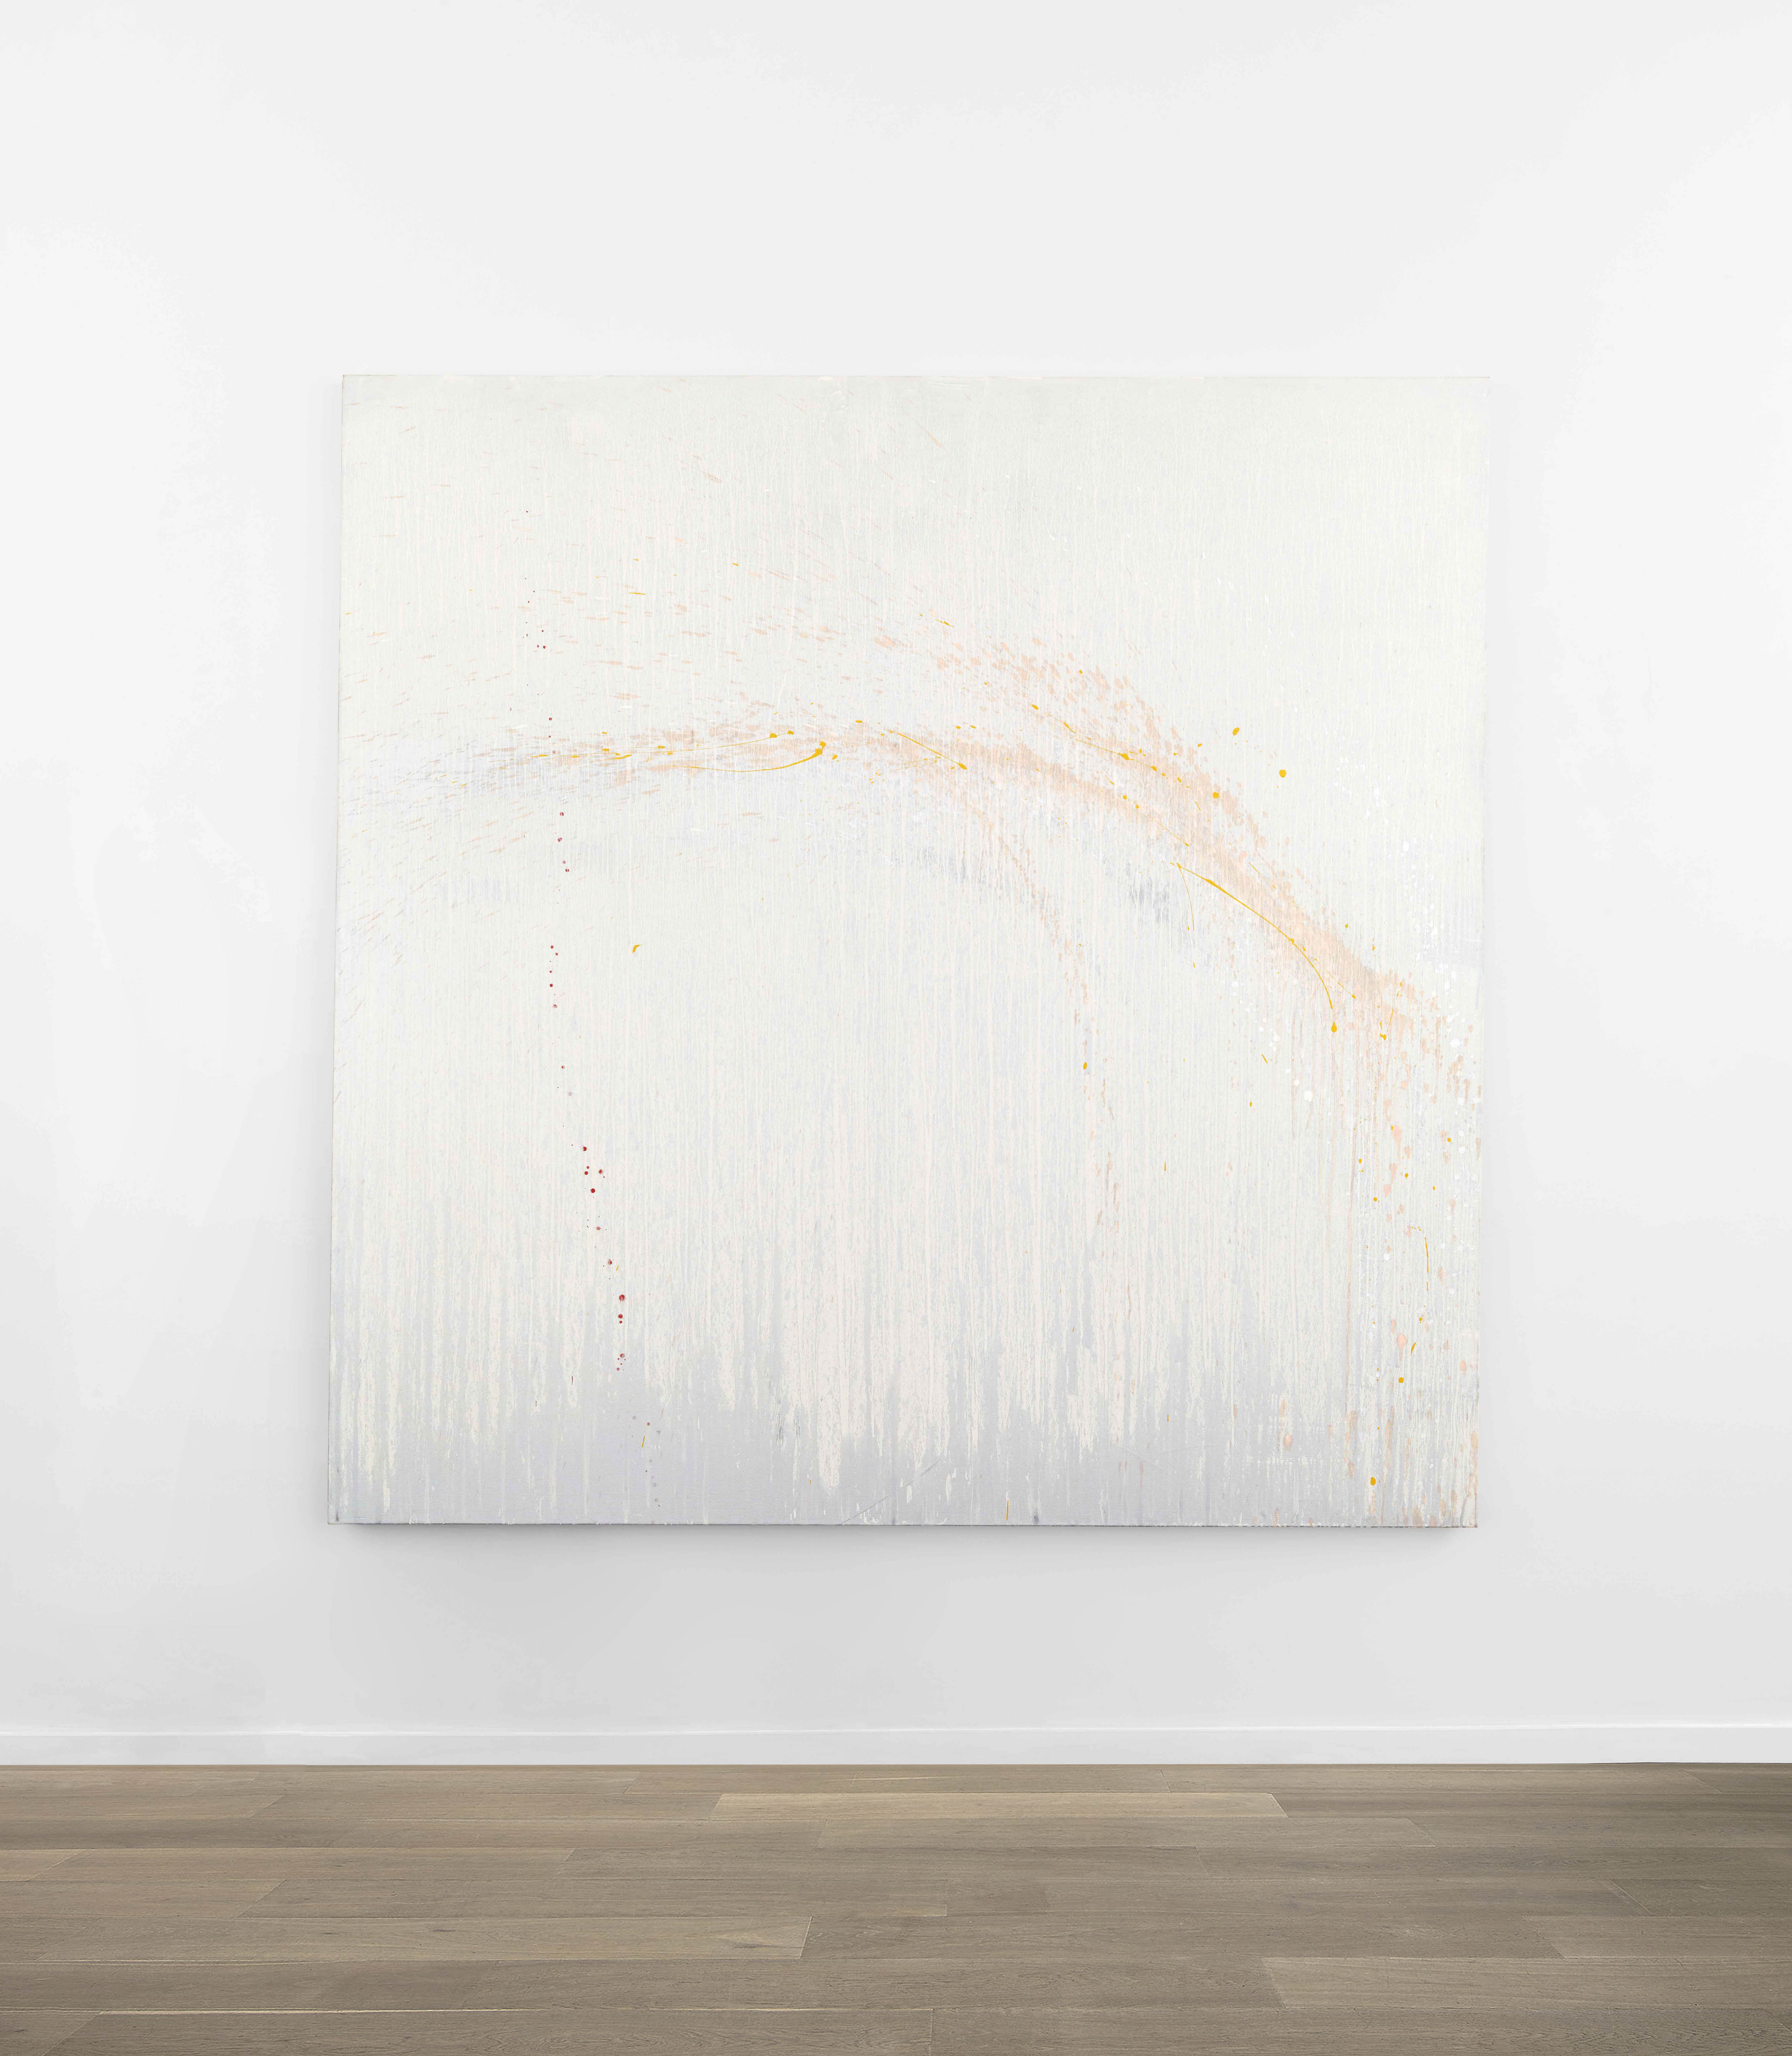 Installation view of Pat Steir's painting Distant Mist